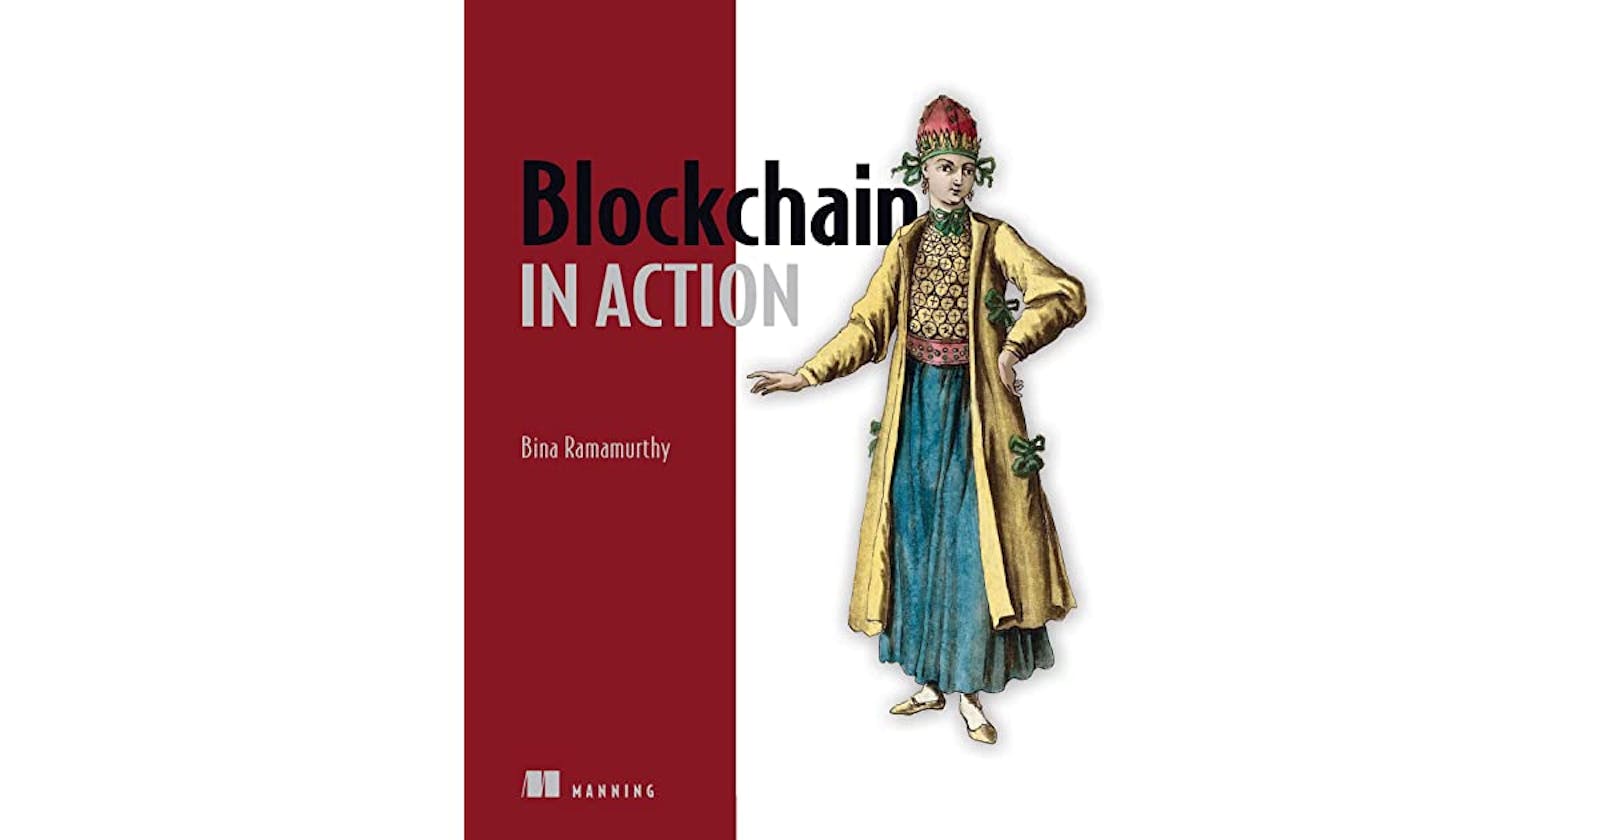 Blockchain in Action: Book Review